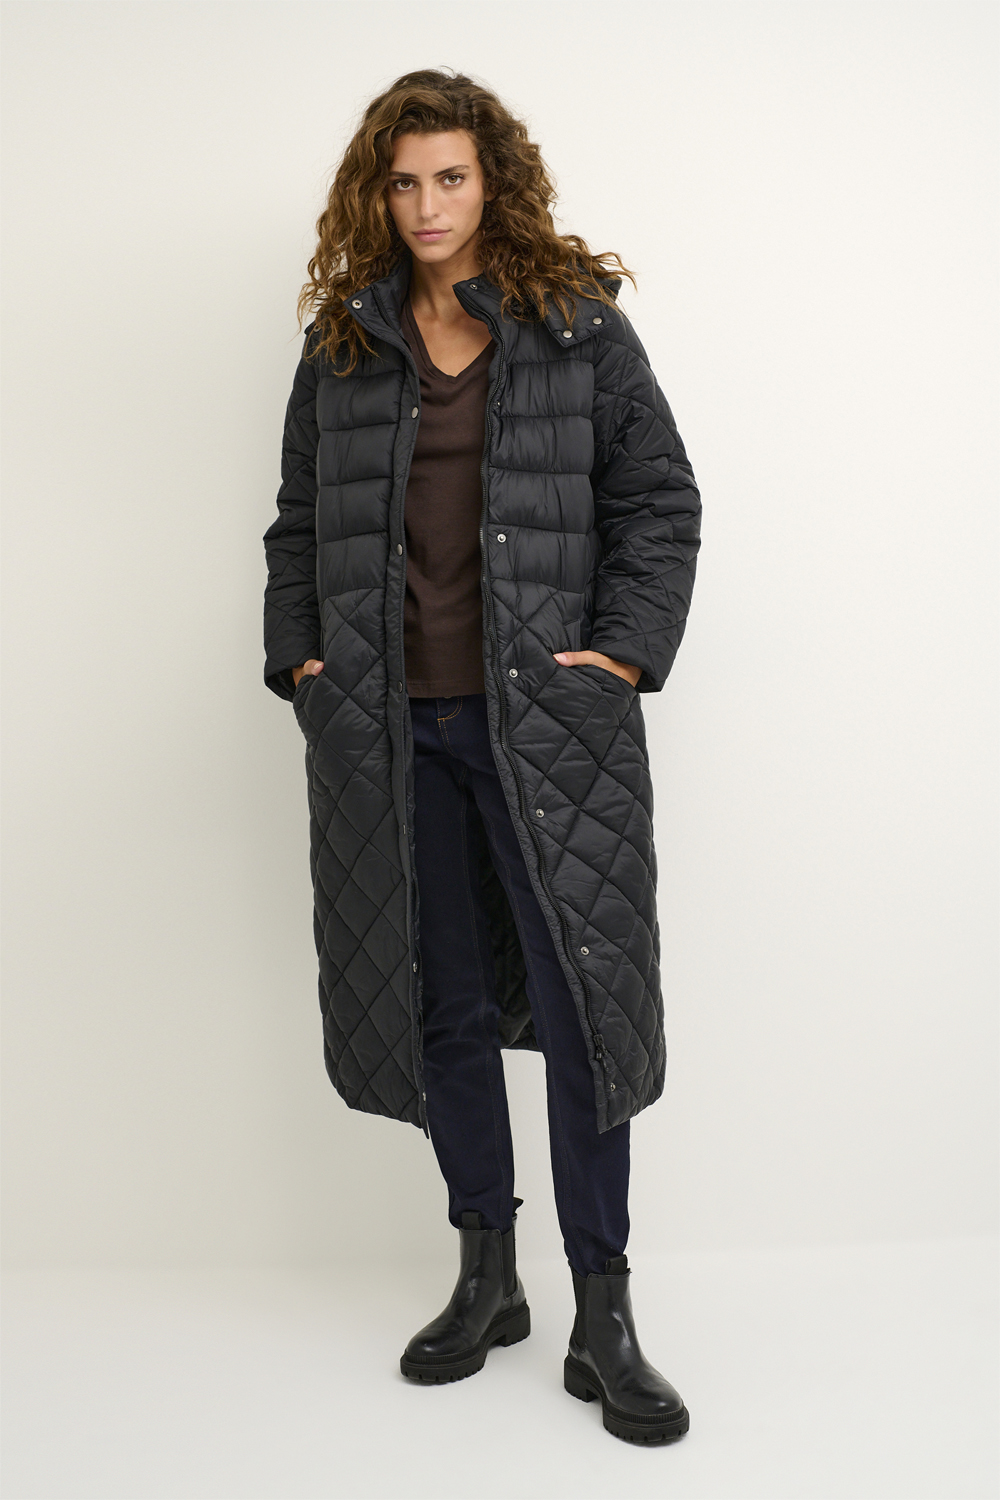 Crgaiagro Quilted Jacket